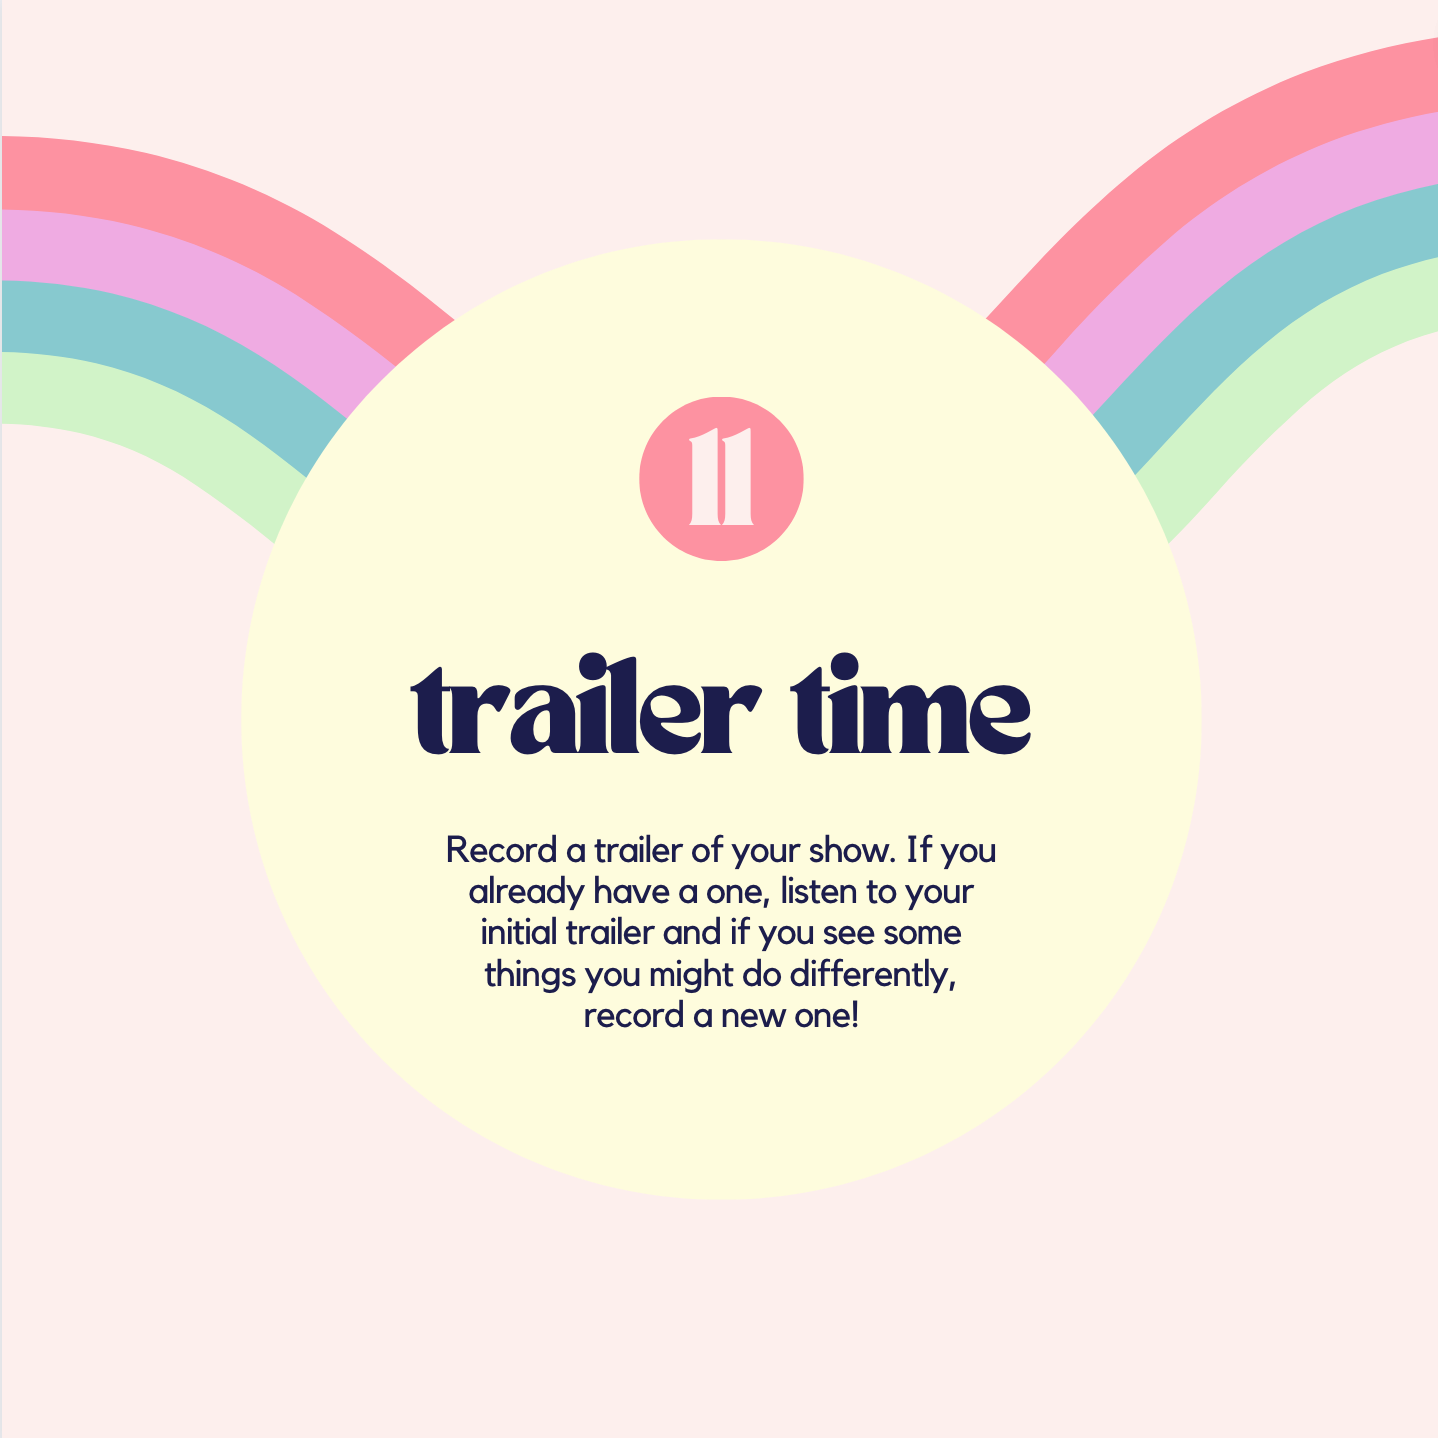 trailer time! Record a trailer of your show. If you already have a podcast: listen to your initial trailer and if you see some things you might do differently, record a new one!